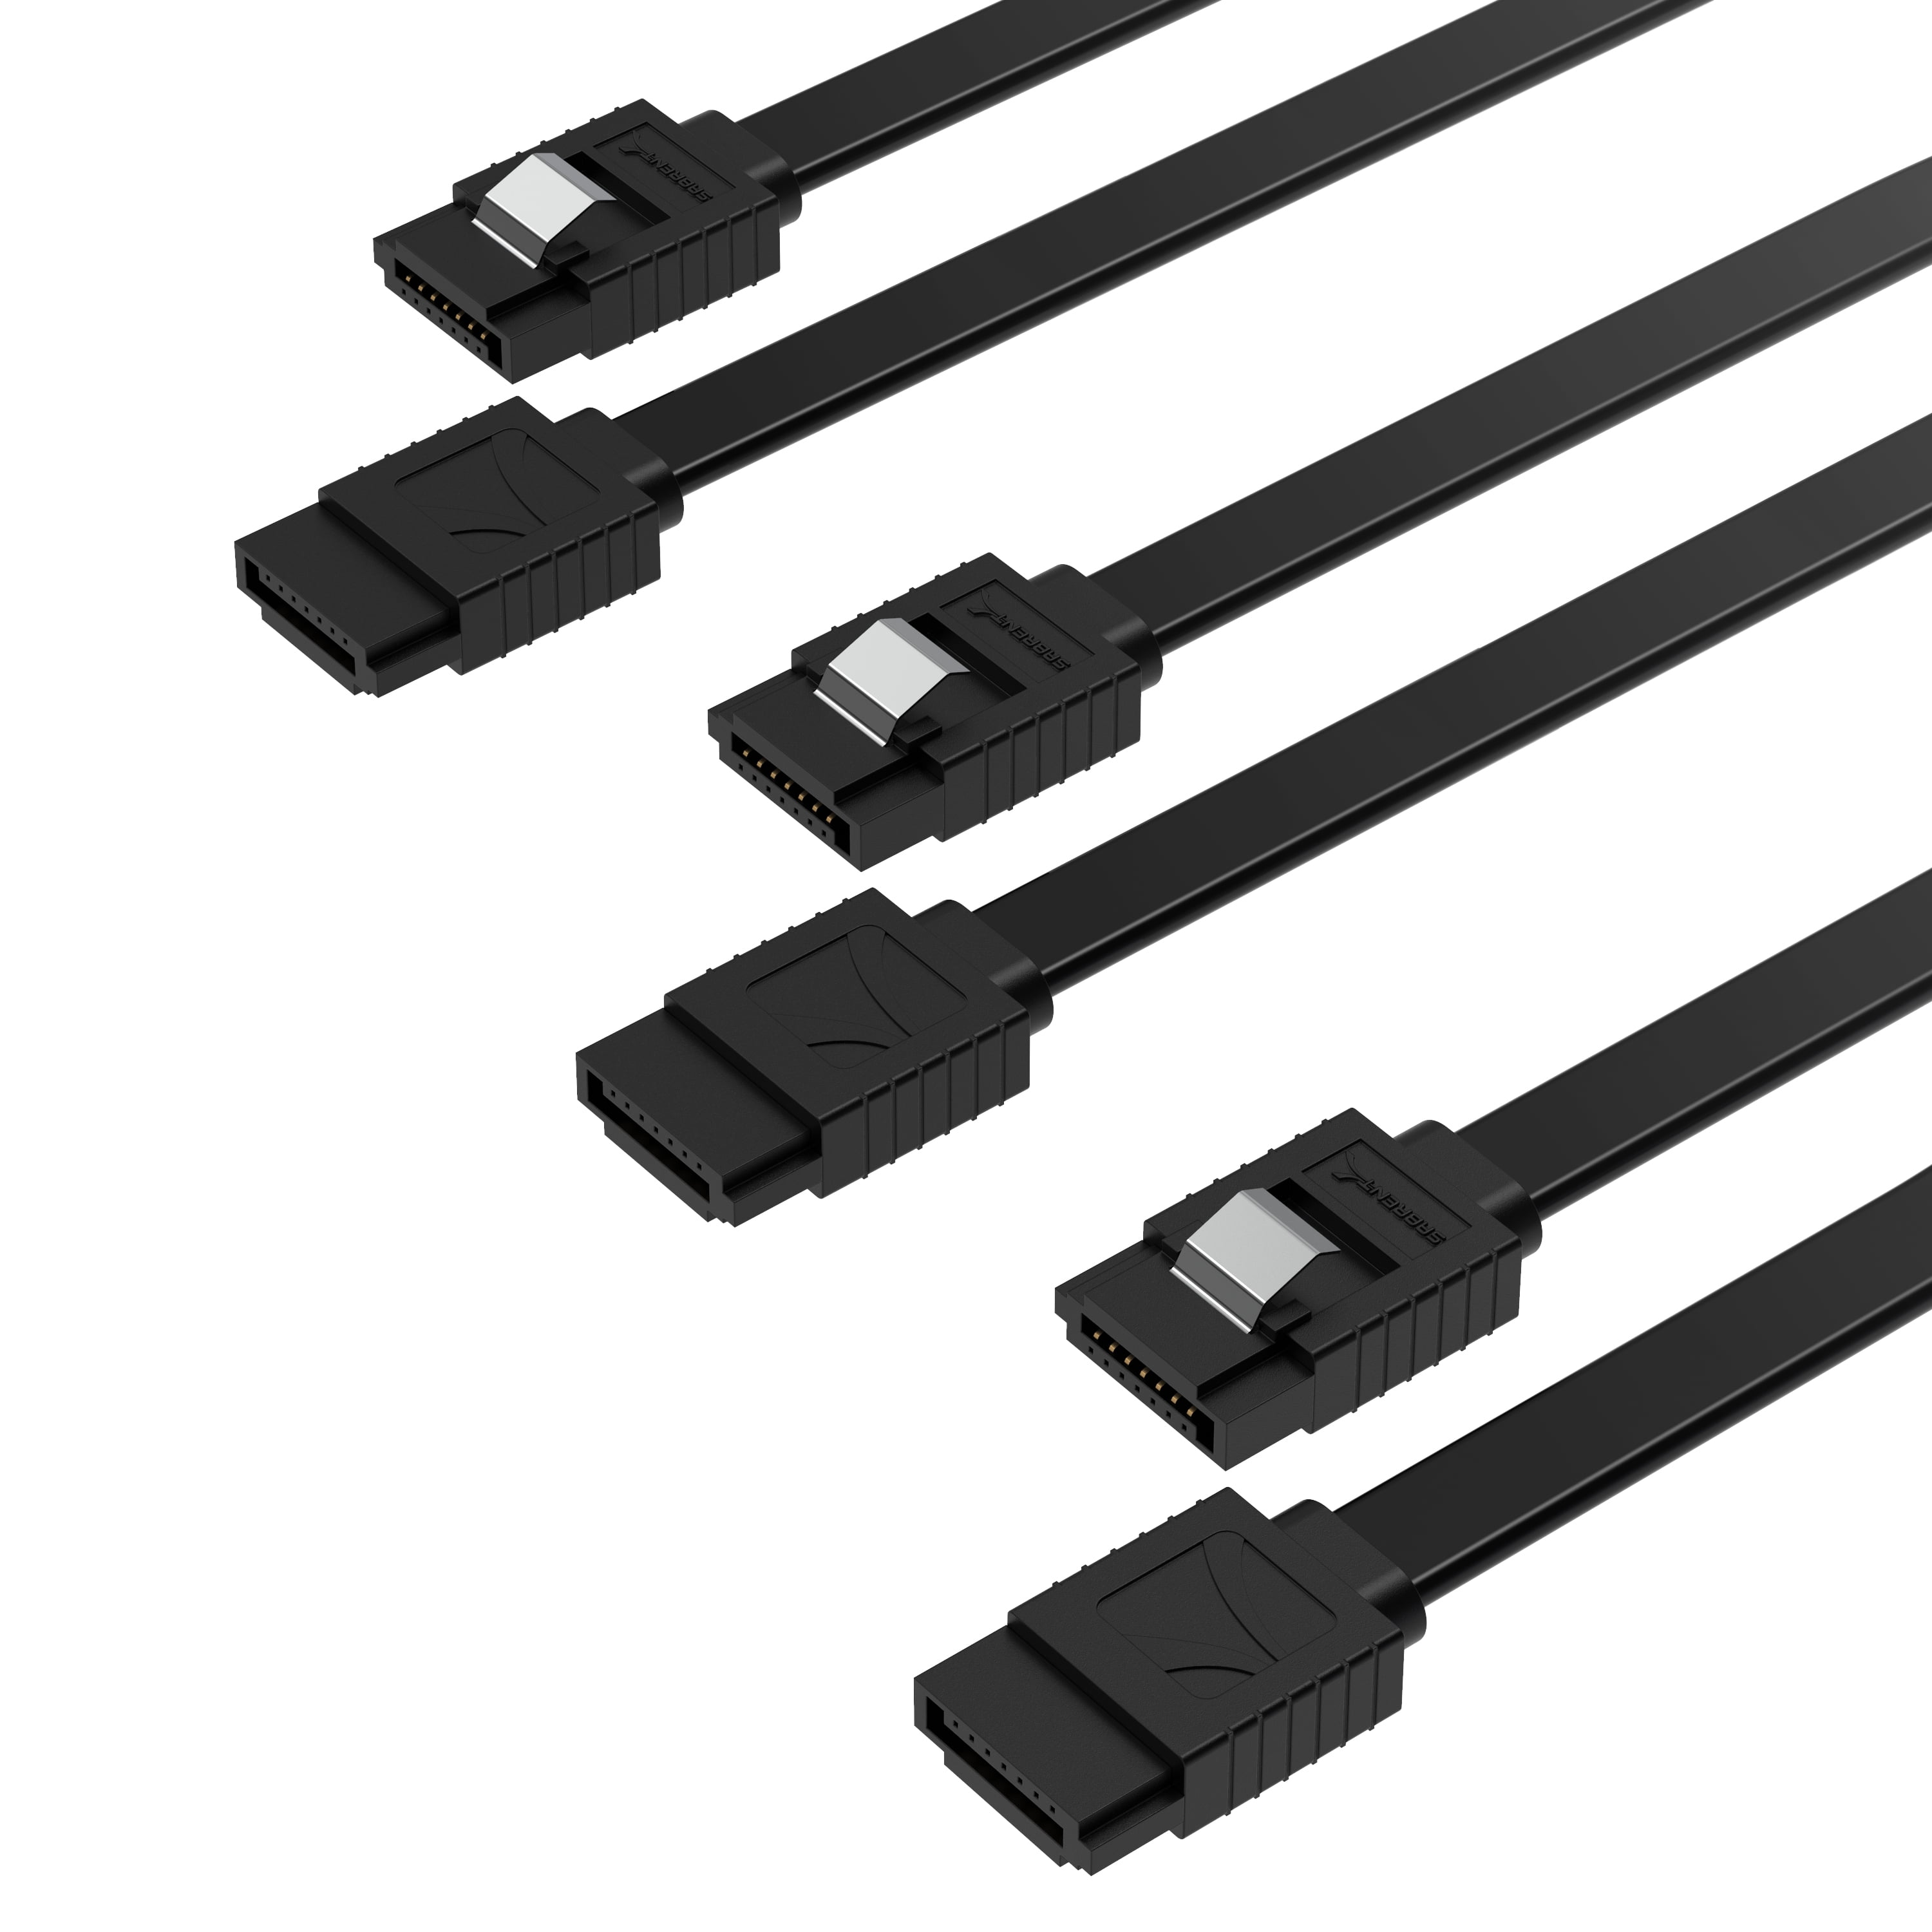  SABRENT SATA III (6 Gbit/s) Straight Data Cable with Locking  Latch for HDD/SSD/CD and DVD Drives (3 Pack 20 Inch) in Black (CB-SFK3) :  Electronics